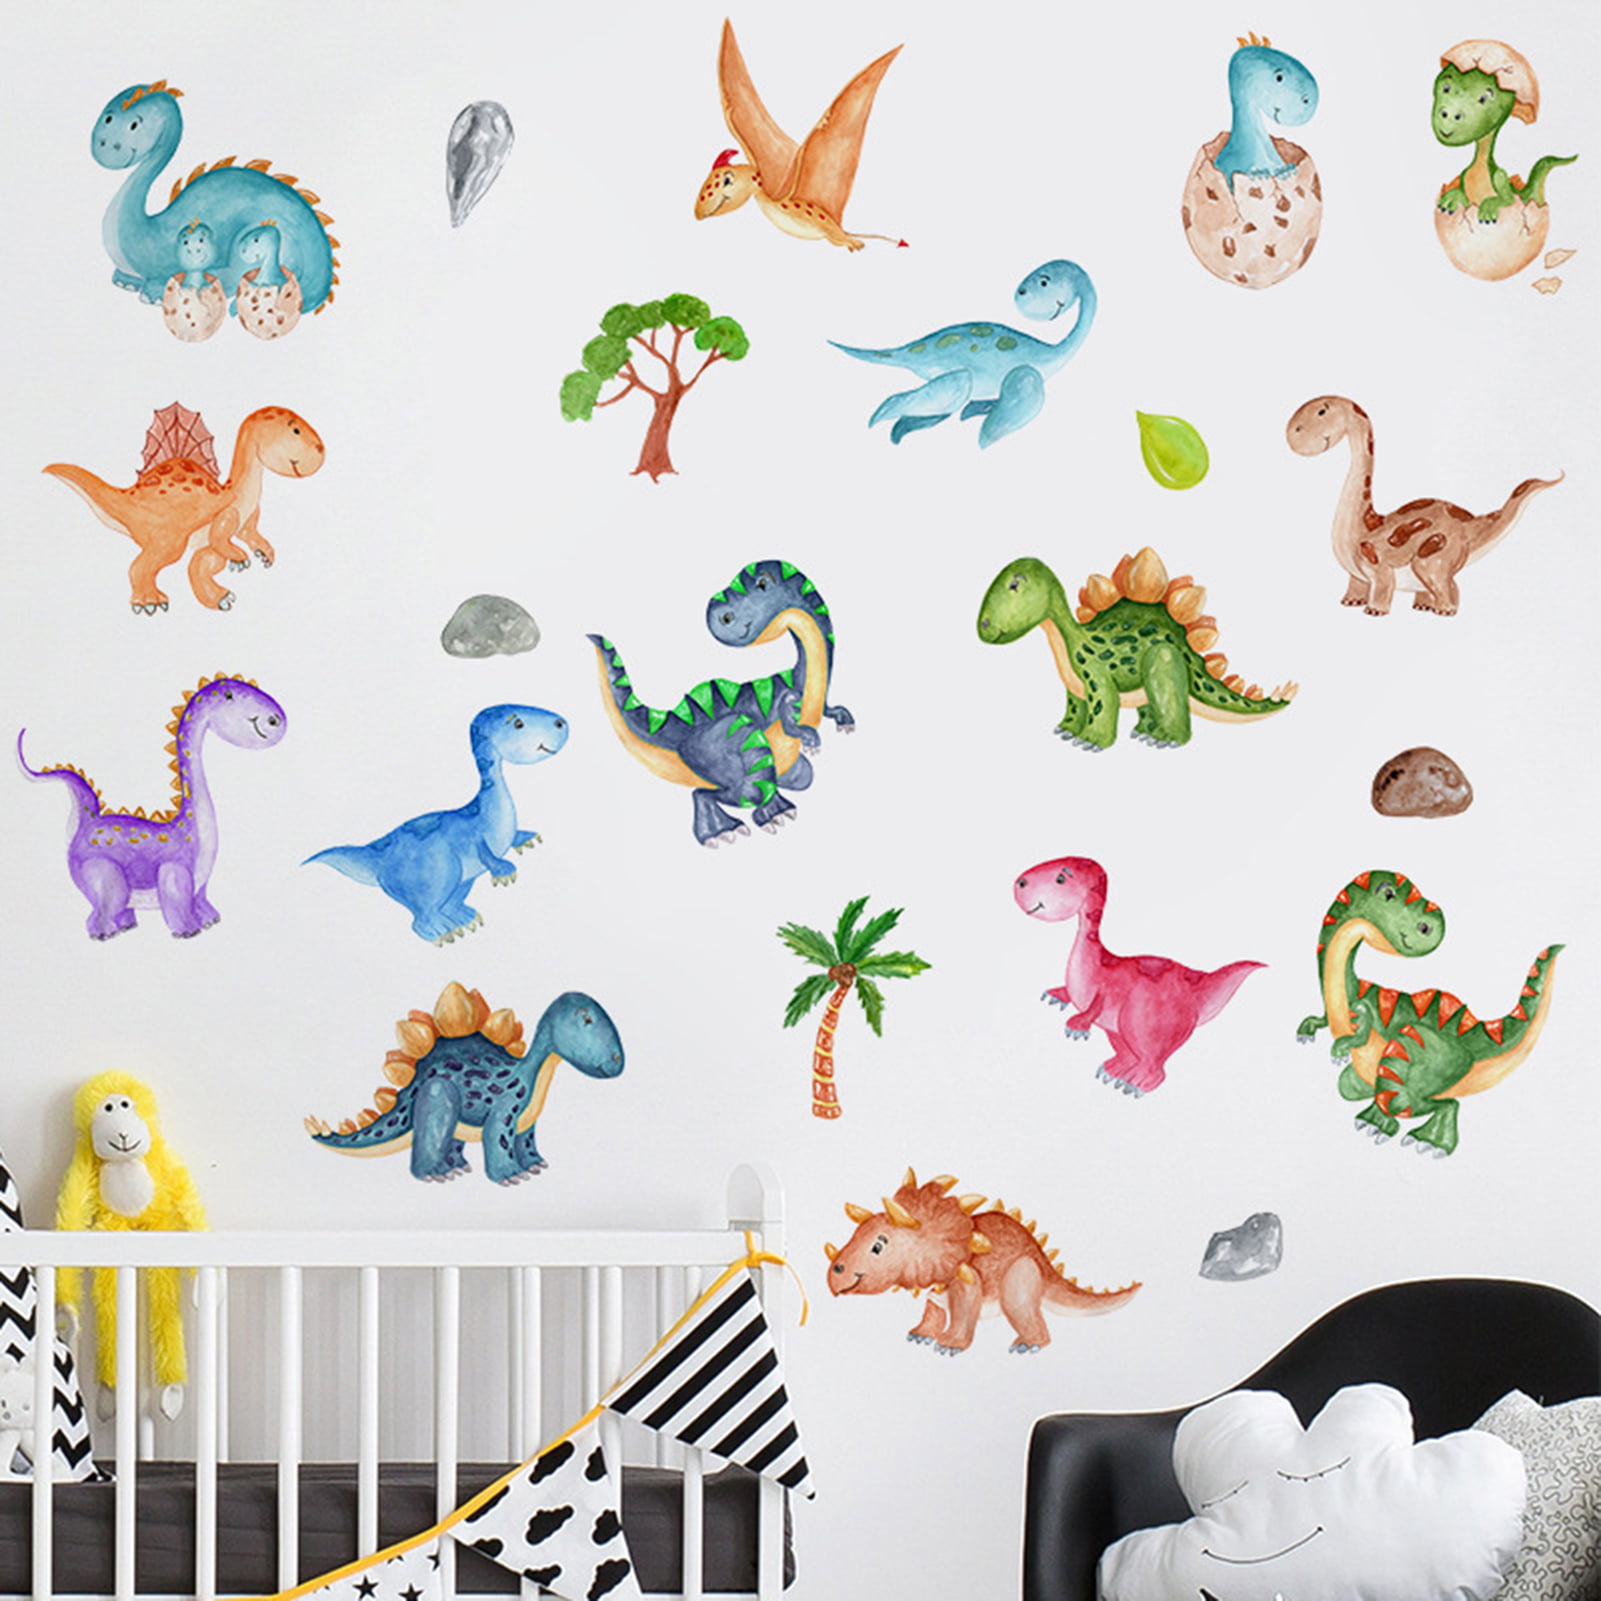 Details about   Removable Home Decor Door Wall Sticker Self Adhesive Animals Dinosaurs 